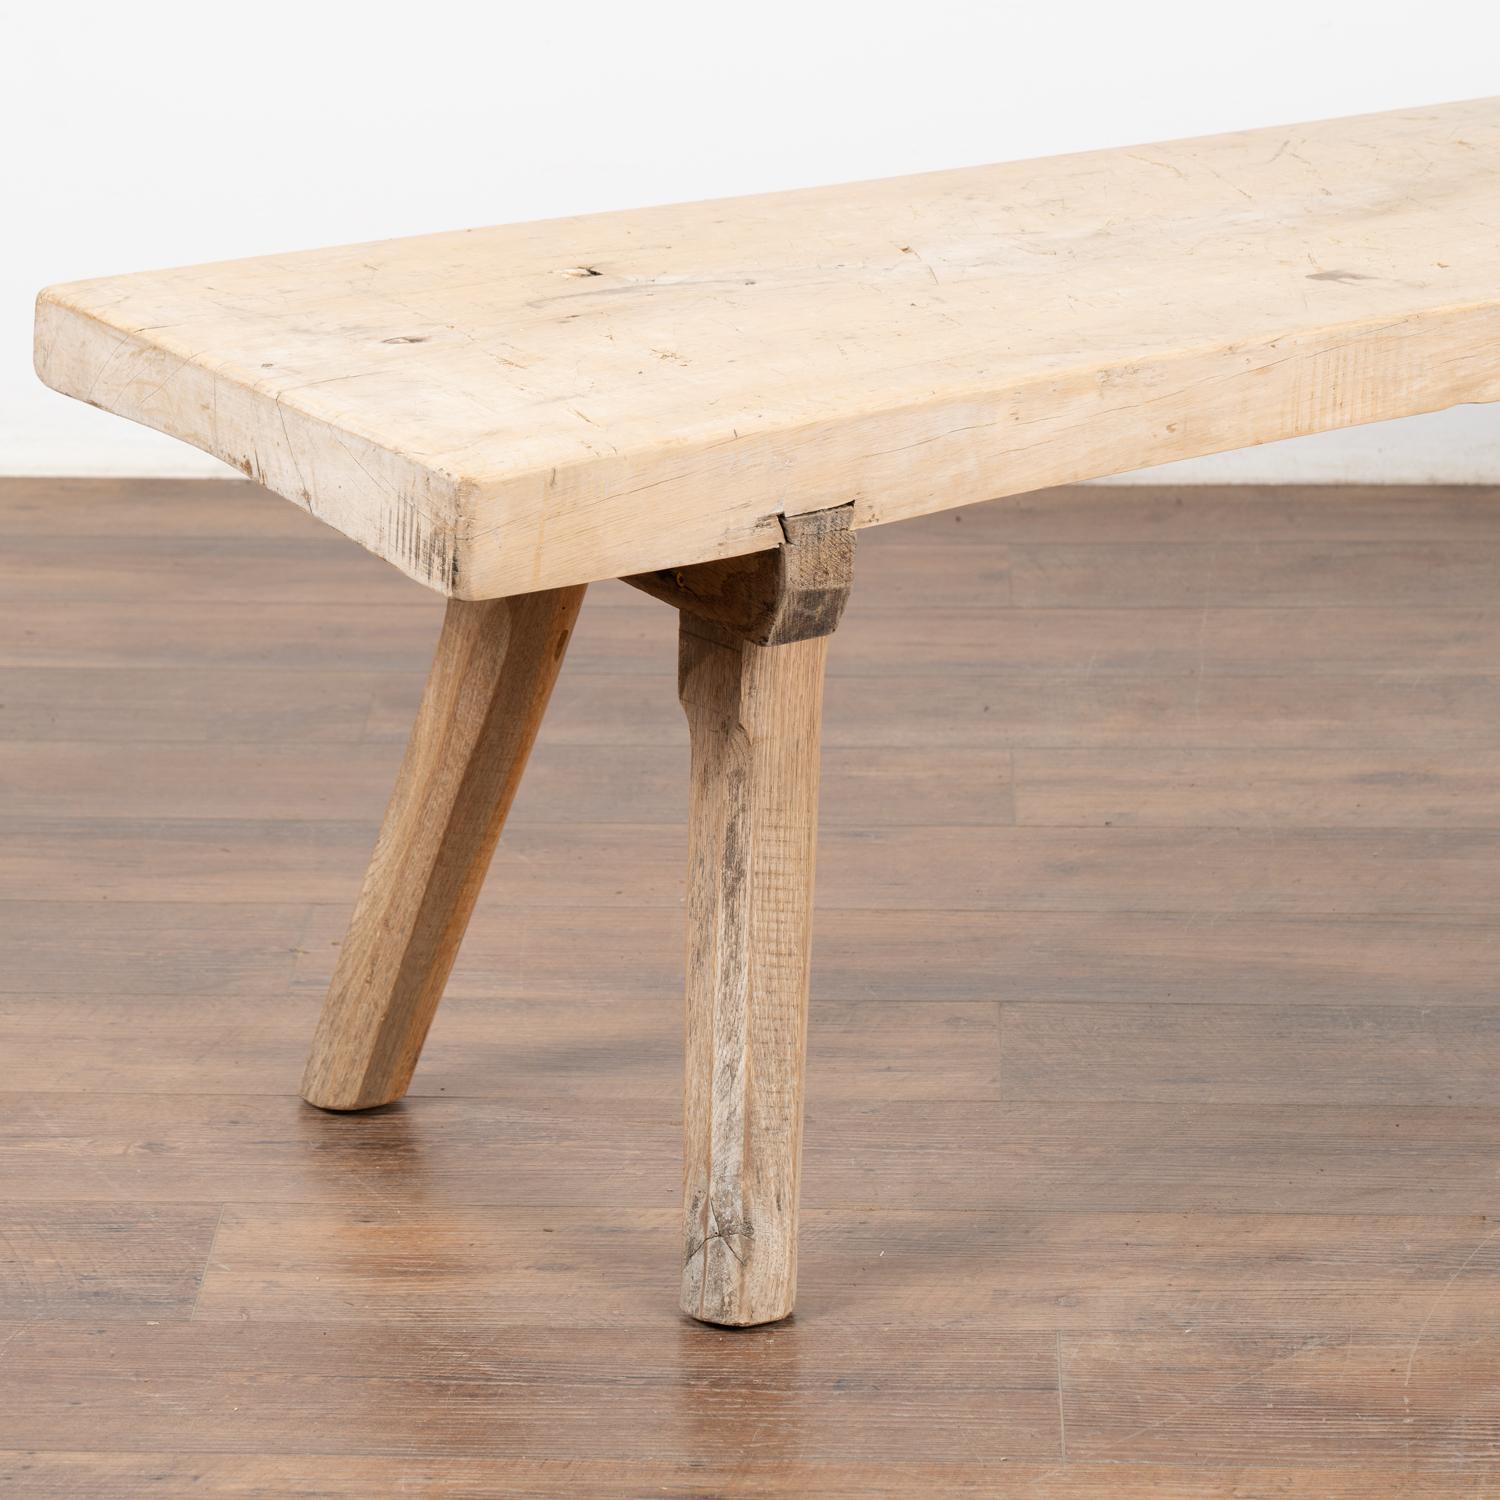 20th Century Rustic Coffee Table with Peg Legs, Hungary circa 1900's For Sale